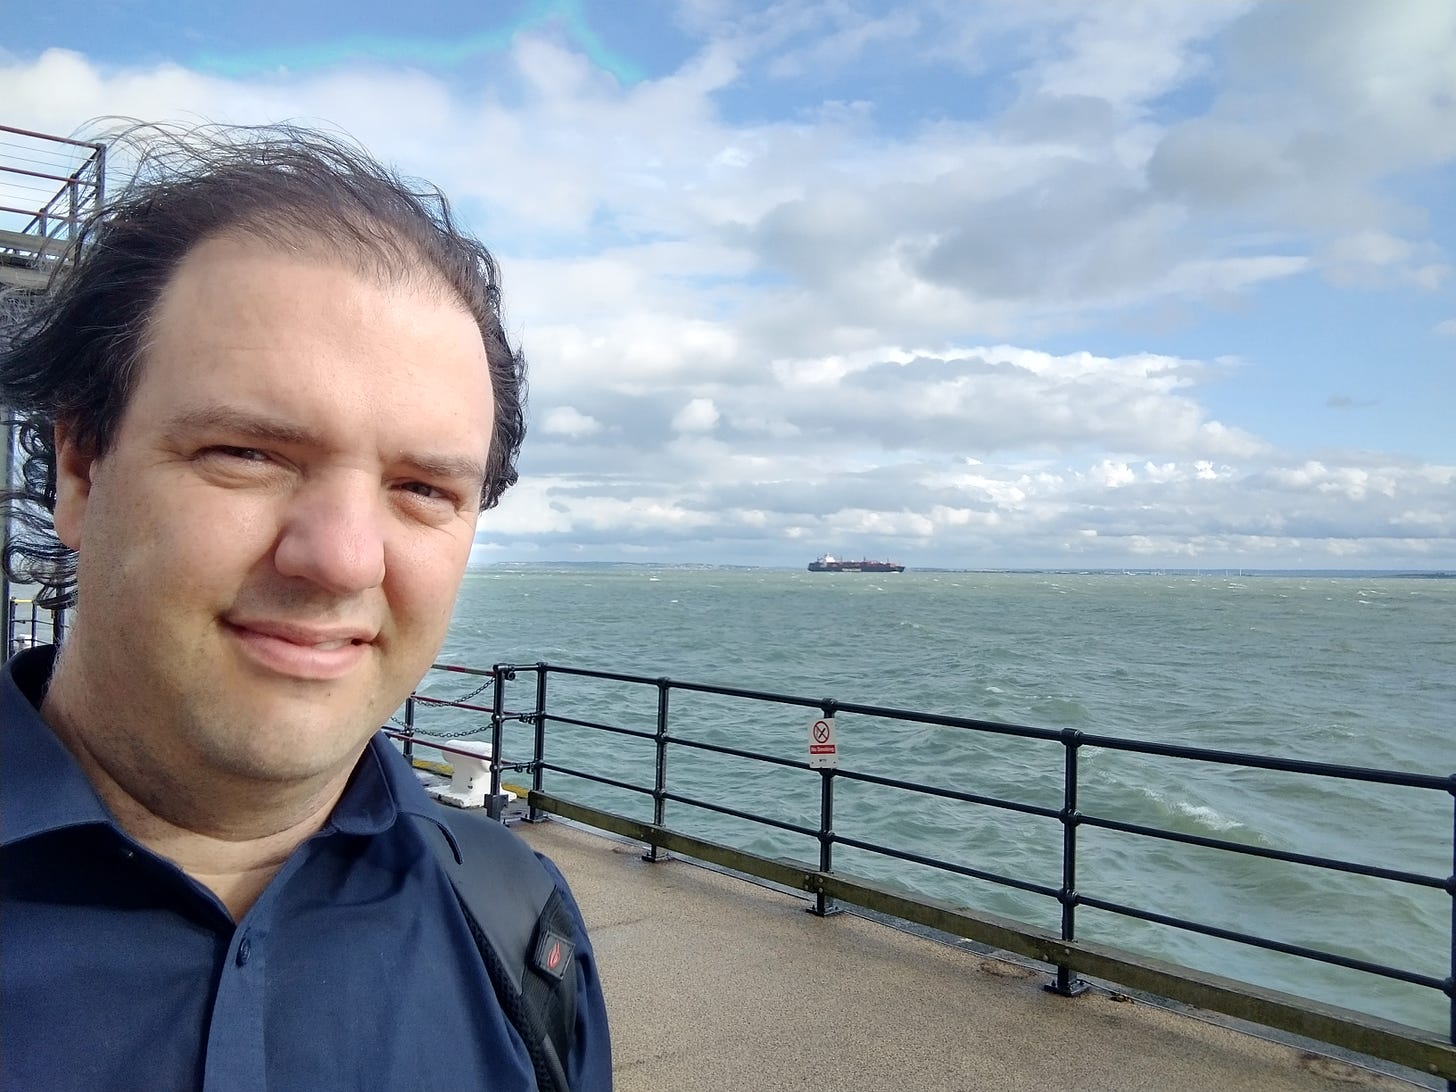 A picture of me, James Gleave, on the end of Southend Pier, with a container ship in the background